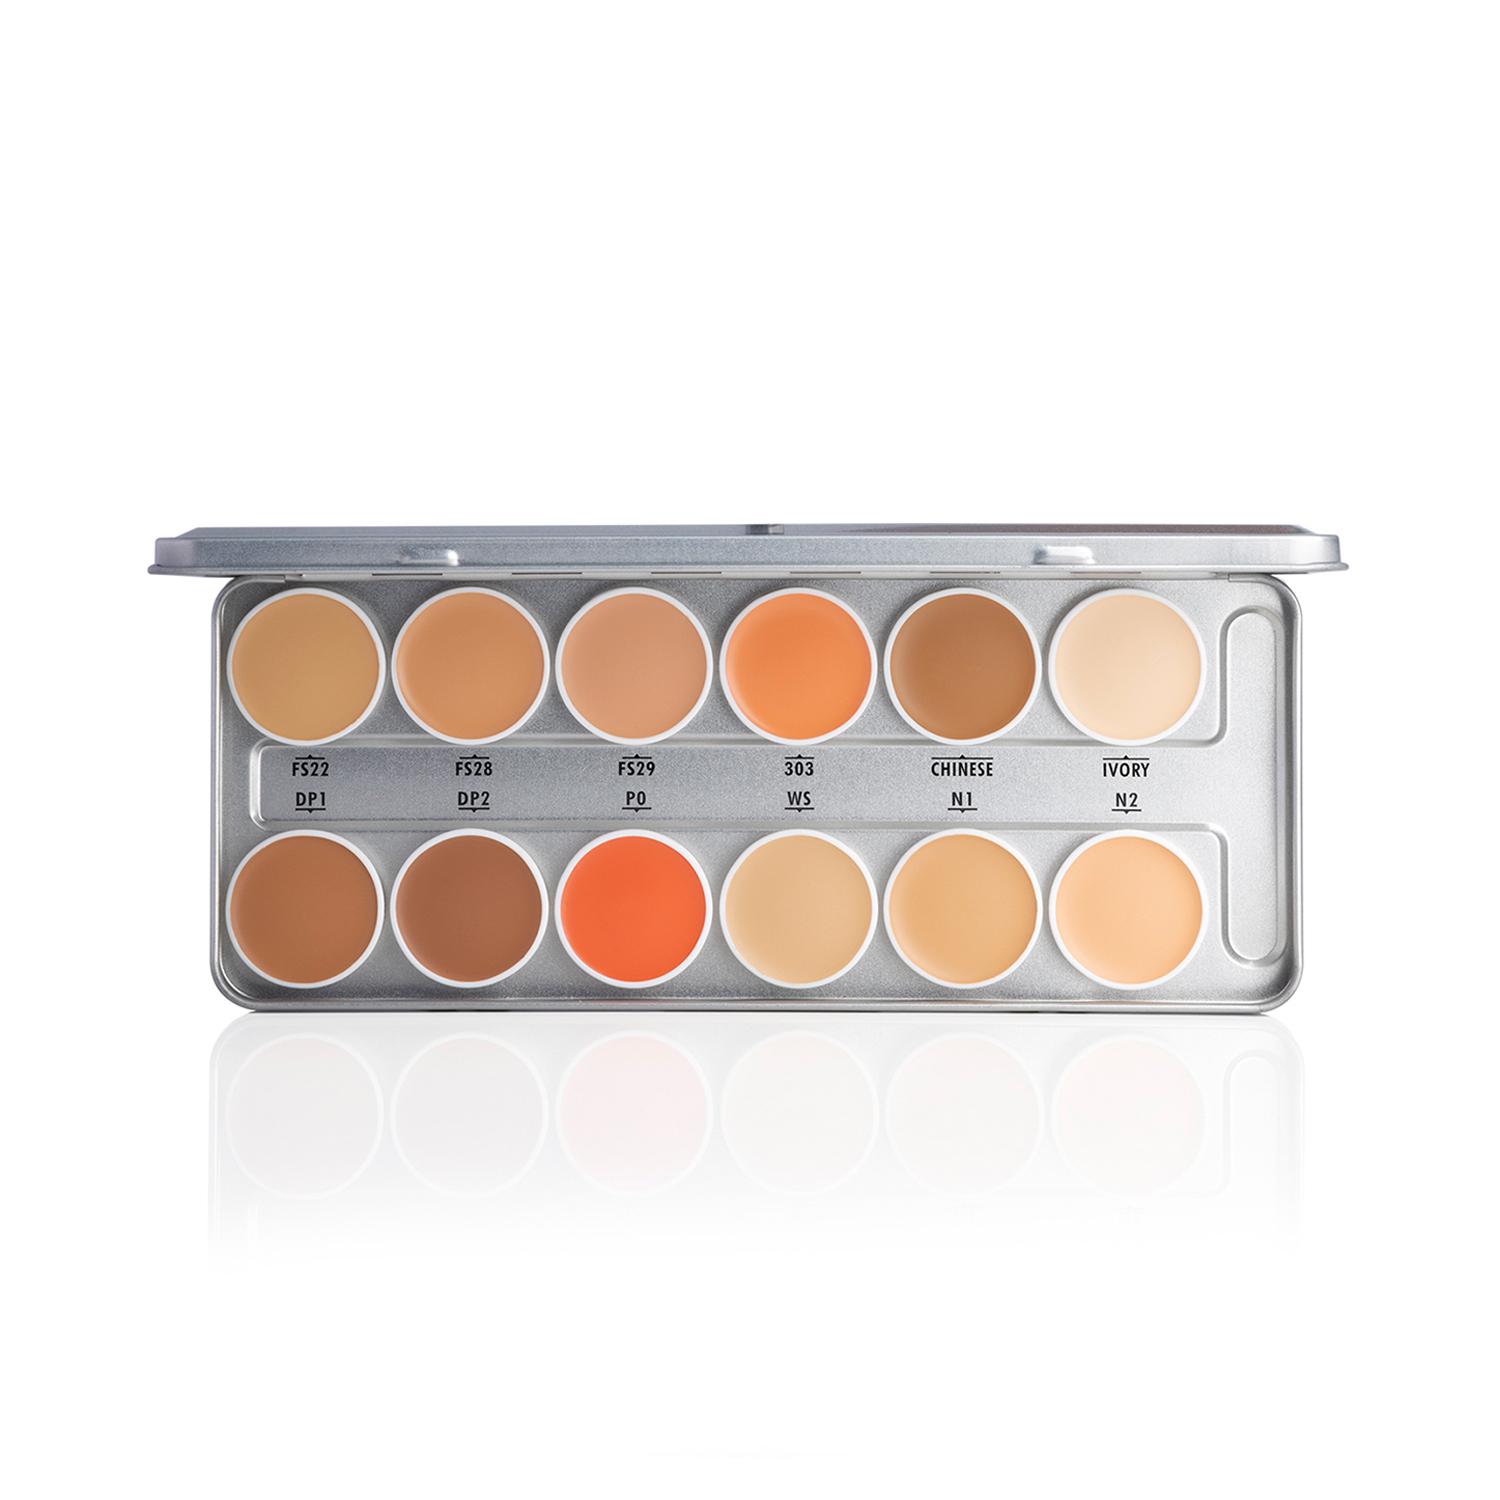 PAC | PAC Airsmooth Concealer Palette - X12 Shade (3.5g)